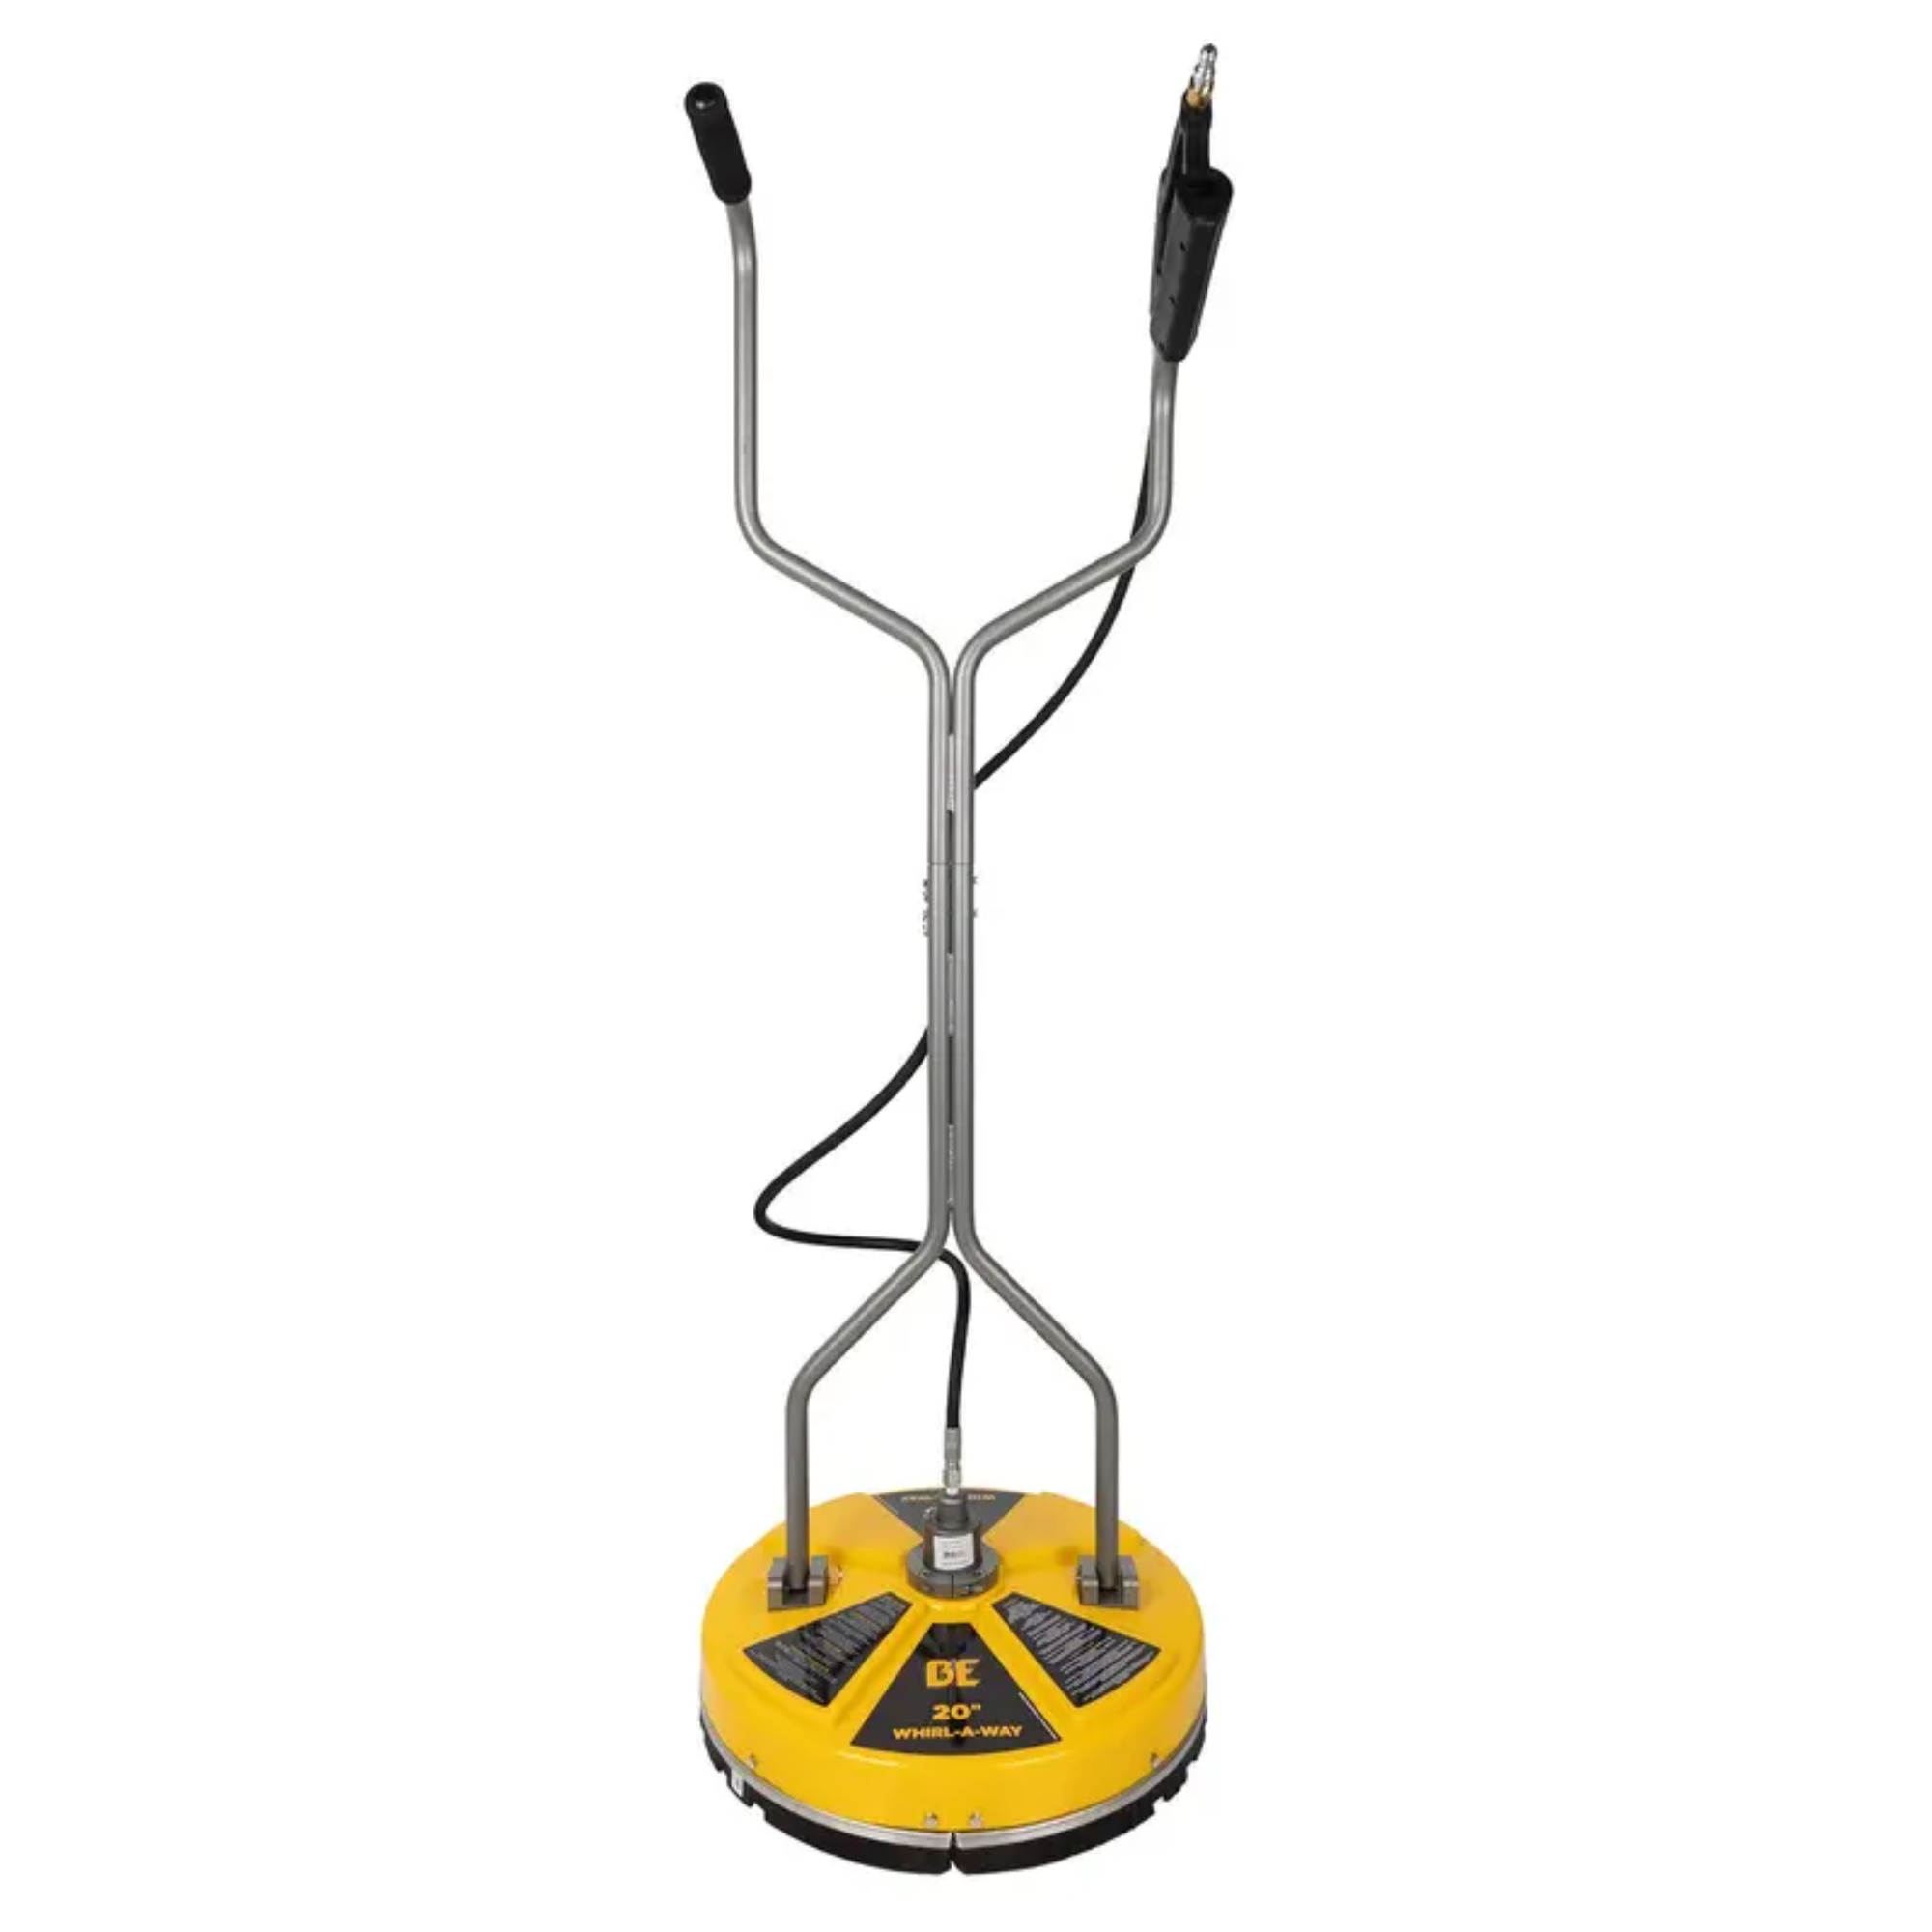 BE 20" Whirl-A-Way Surface Cleaner